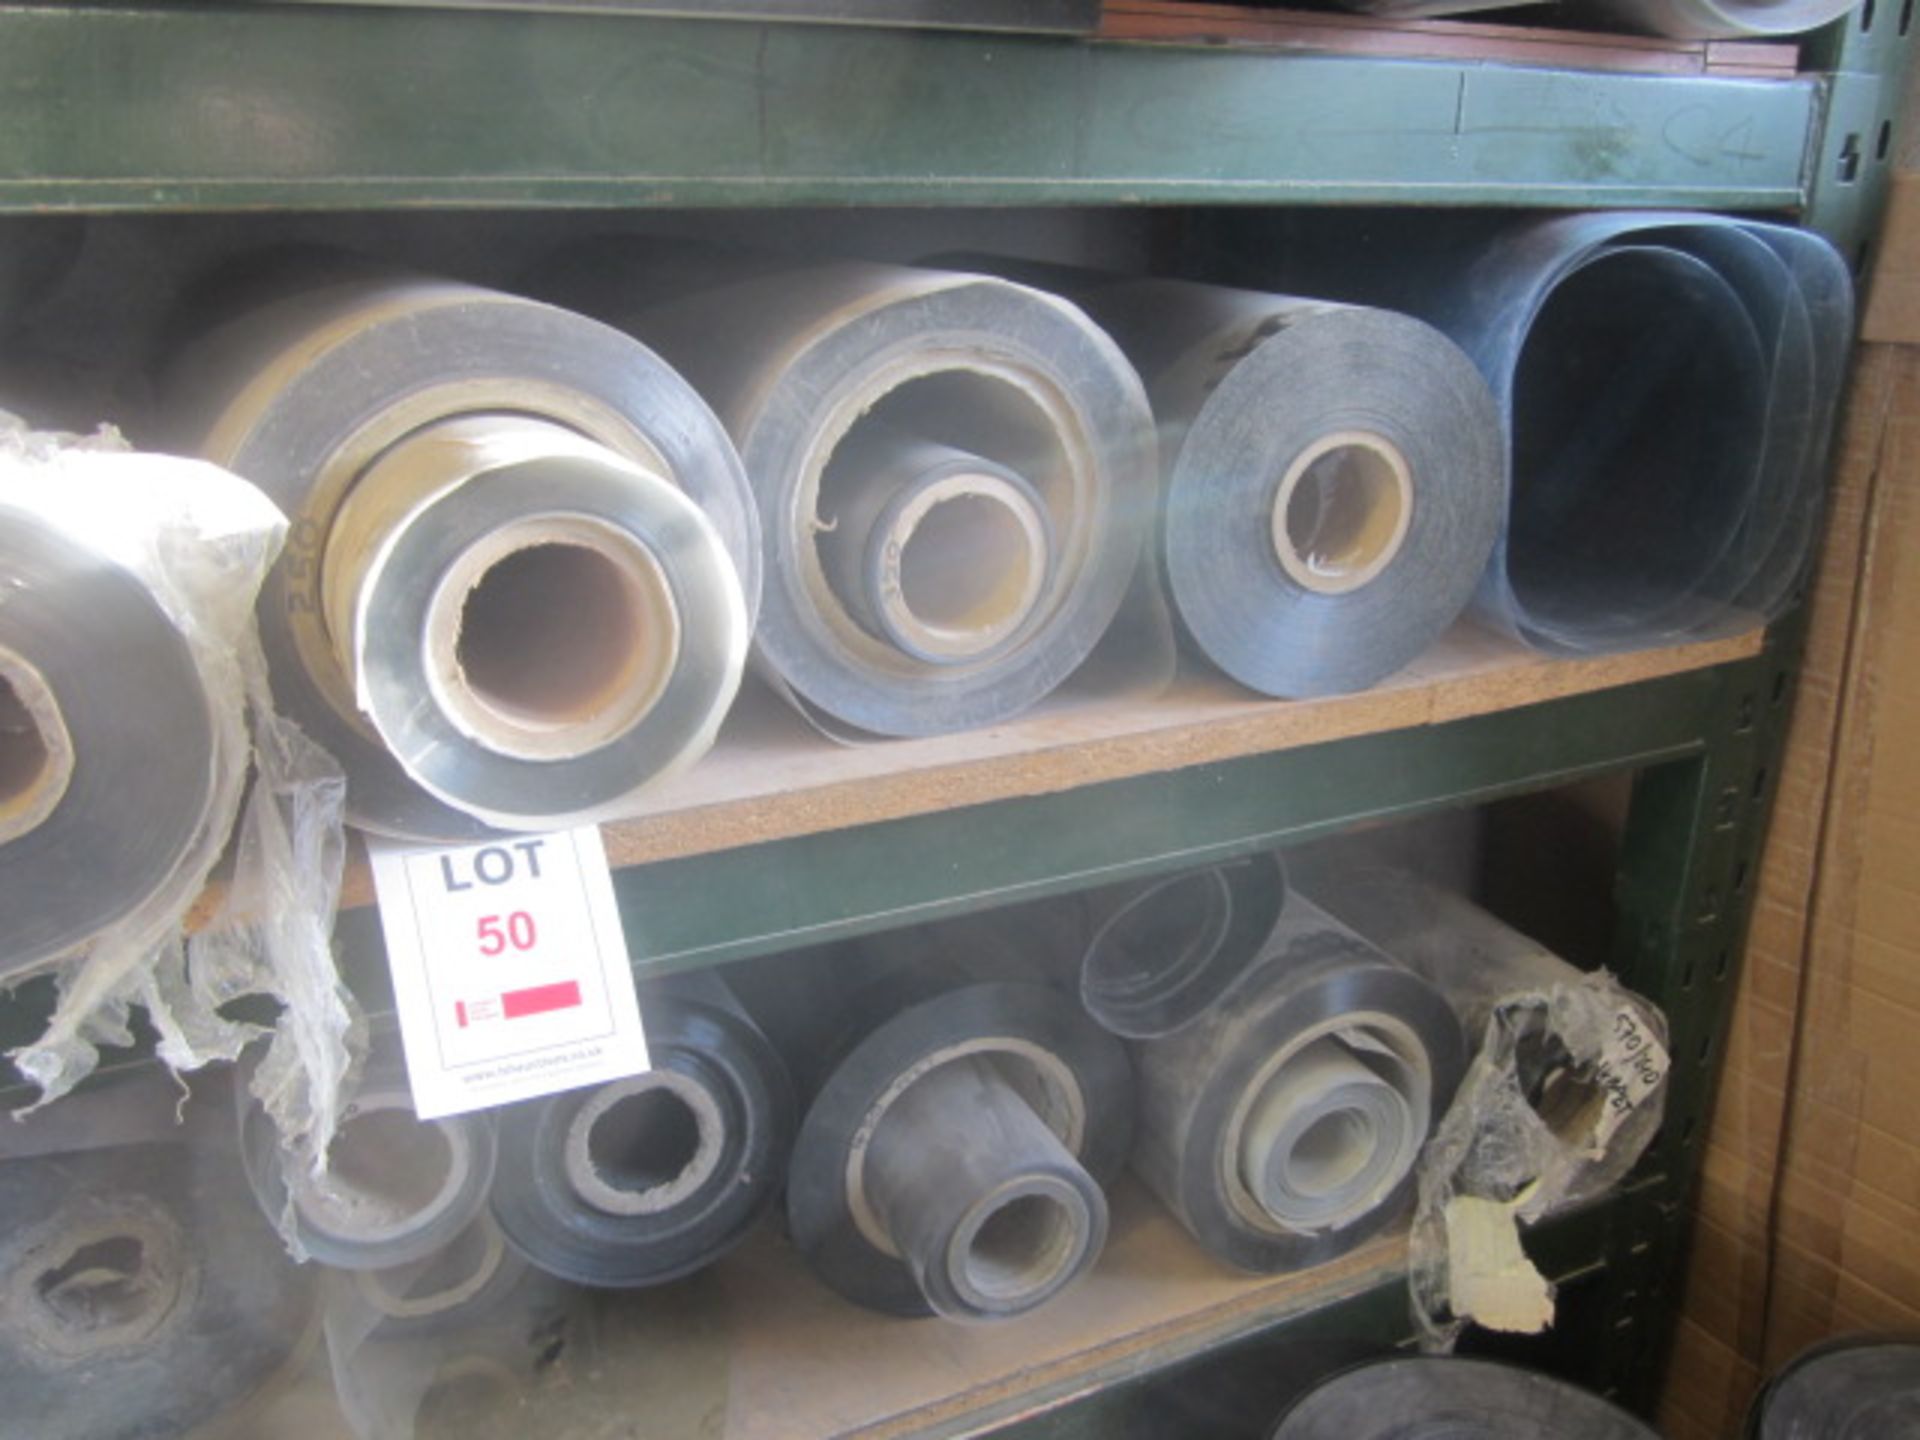 Assorted part reels of Apet film stock, approx. 85 - excluding racking. Located at Supreme - Image 10 of 12